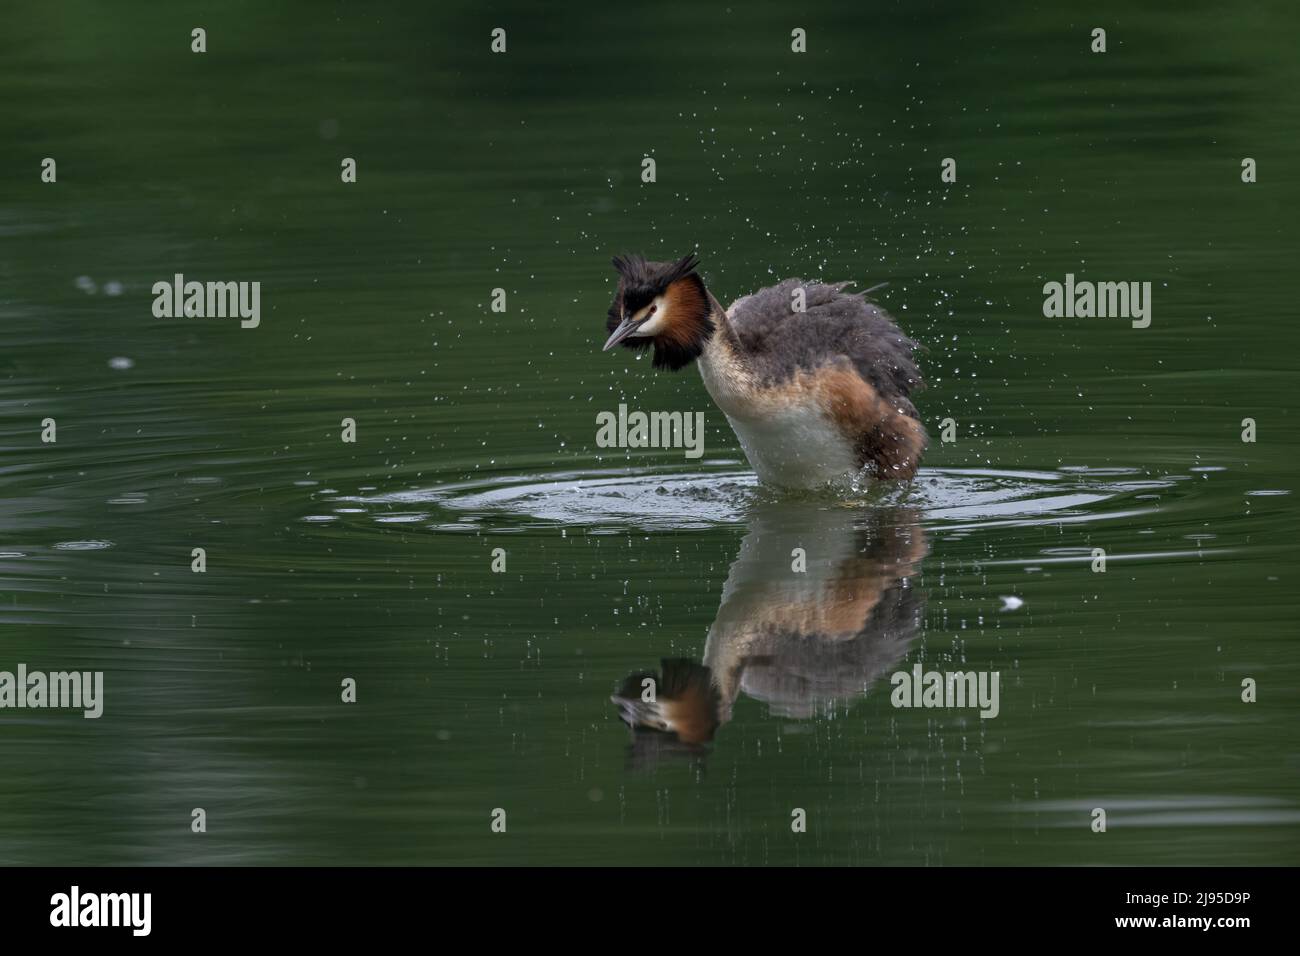 A Great Crested Grebe (Podiceps cristatus), in its colourful breeding plumage, shakes itself dry on a dark green pond in Kent, England Stock Photo